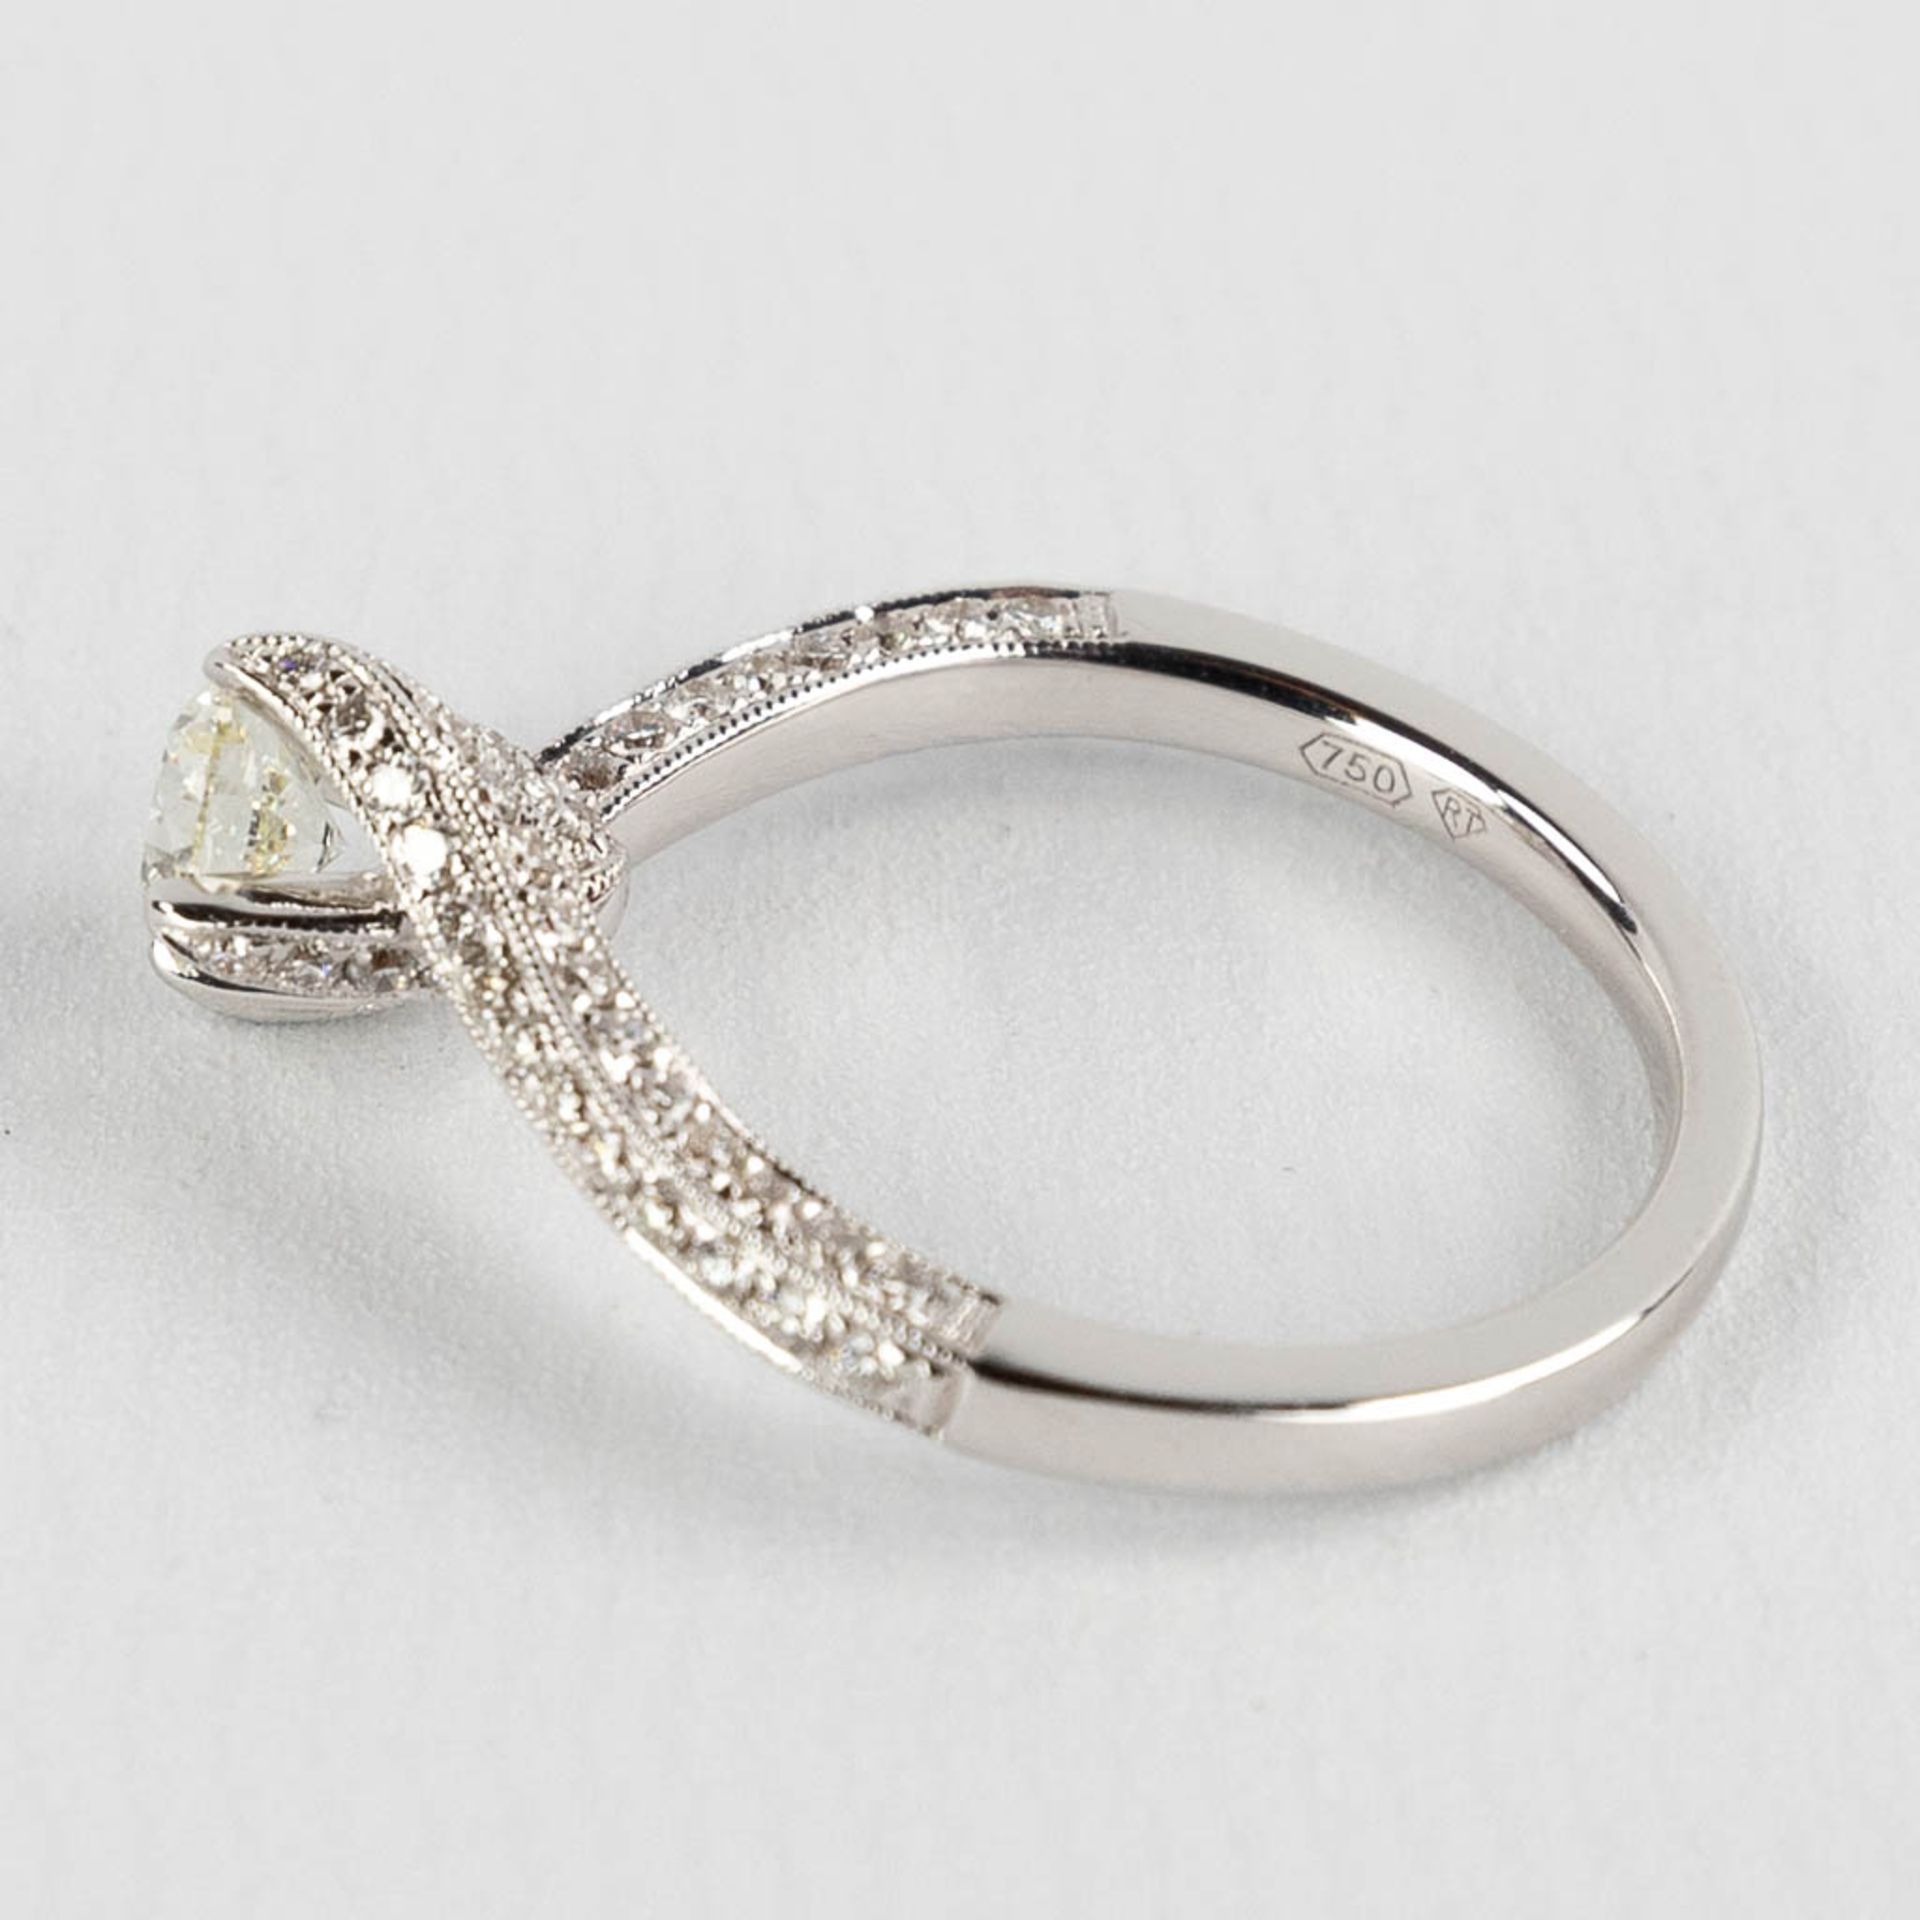 A ring, white gold with brilliant cut diamonds, central stone approximately 0,5ct, total appr. 0,53c - Image 6 of 10